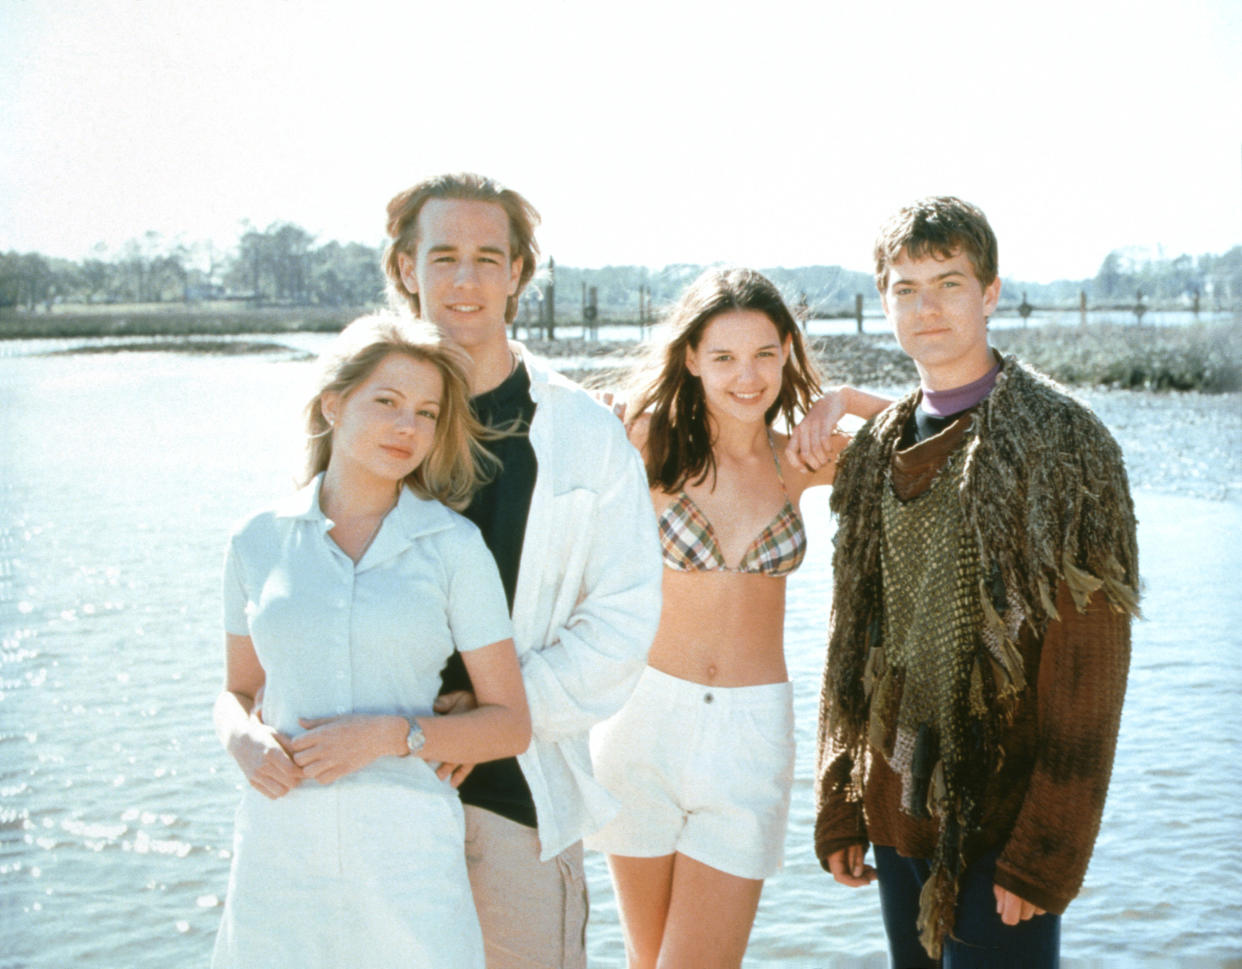 The Dawson's Creek cast filming an early scene of the pilot episode. (Photo: Sony Pictures Television/Courtesy Everett Collection)